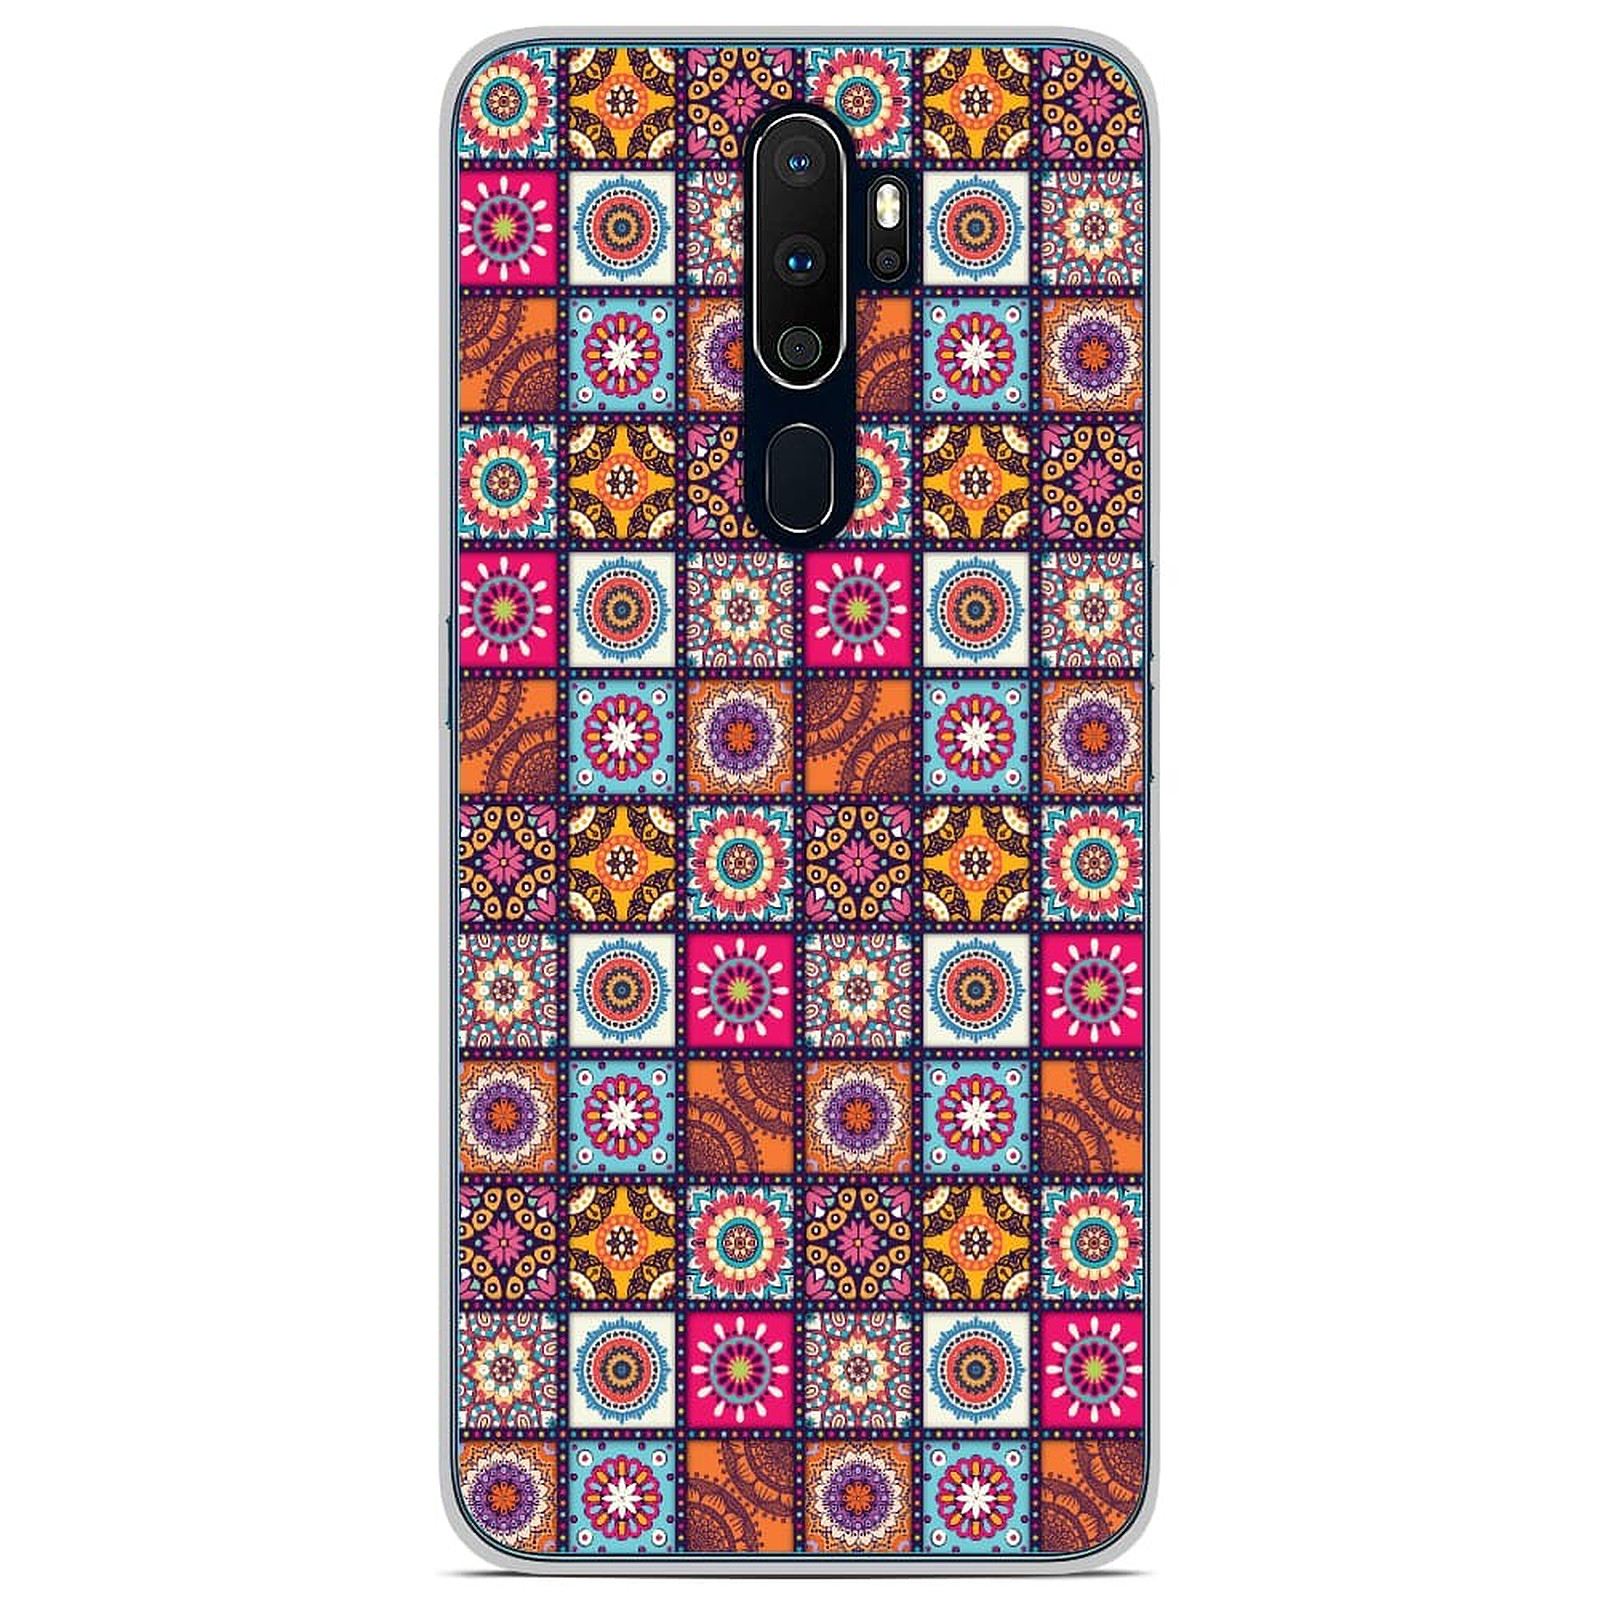 1001 Coques Coque silicone gel Oppo A9 2020 motif Patchwork Mandala - Coque telephone 1001Coques